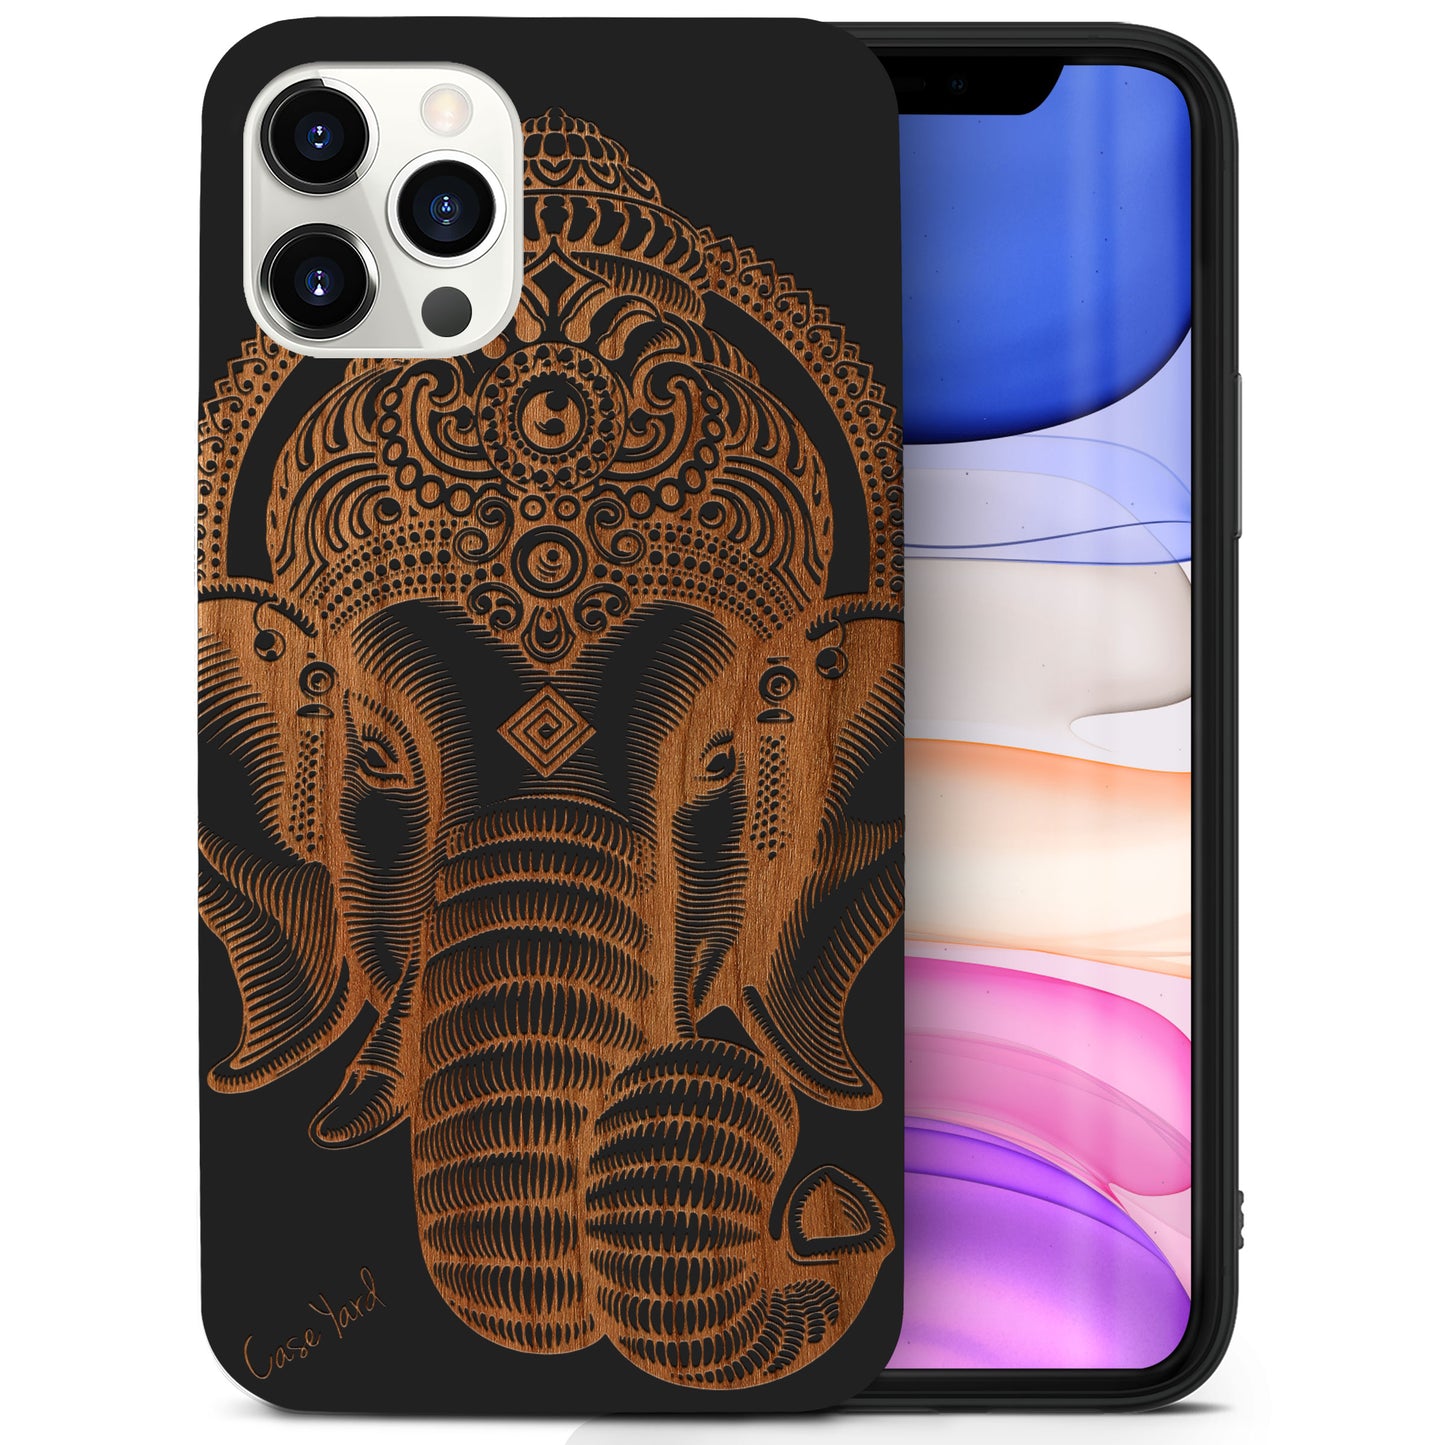 Wooden Cell Phone Case Cover, Laser Engraved case for iPhone & Samsung phone Ganesh Design